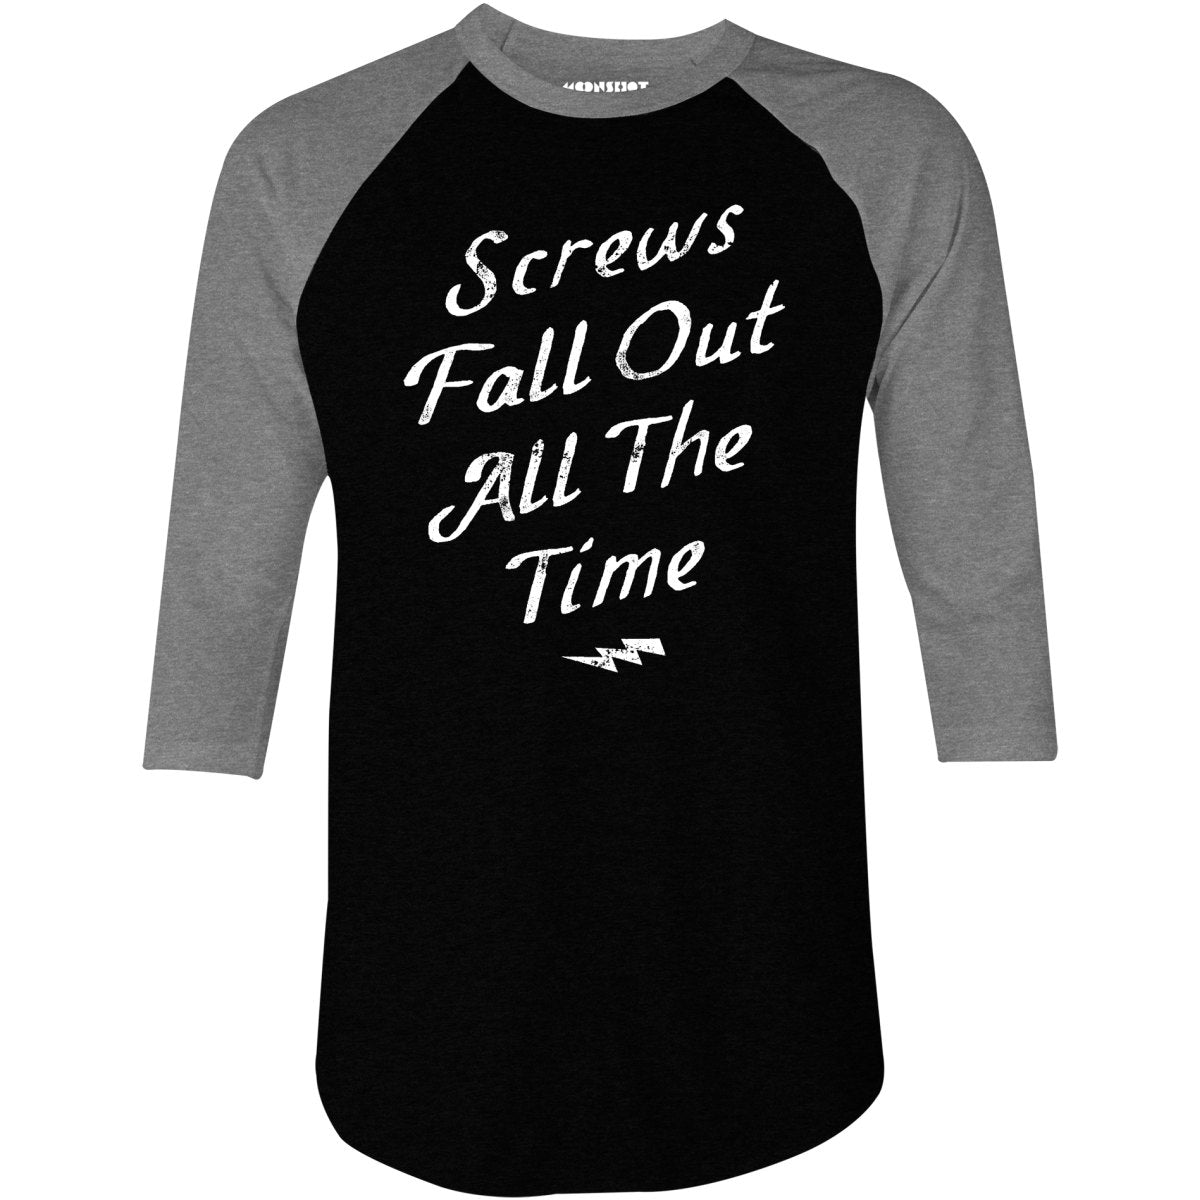 Screws Fall Out All The Time - 3/4 Sleeve Raglan T-Shirt